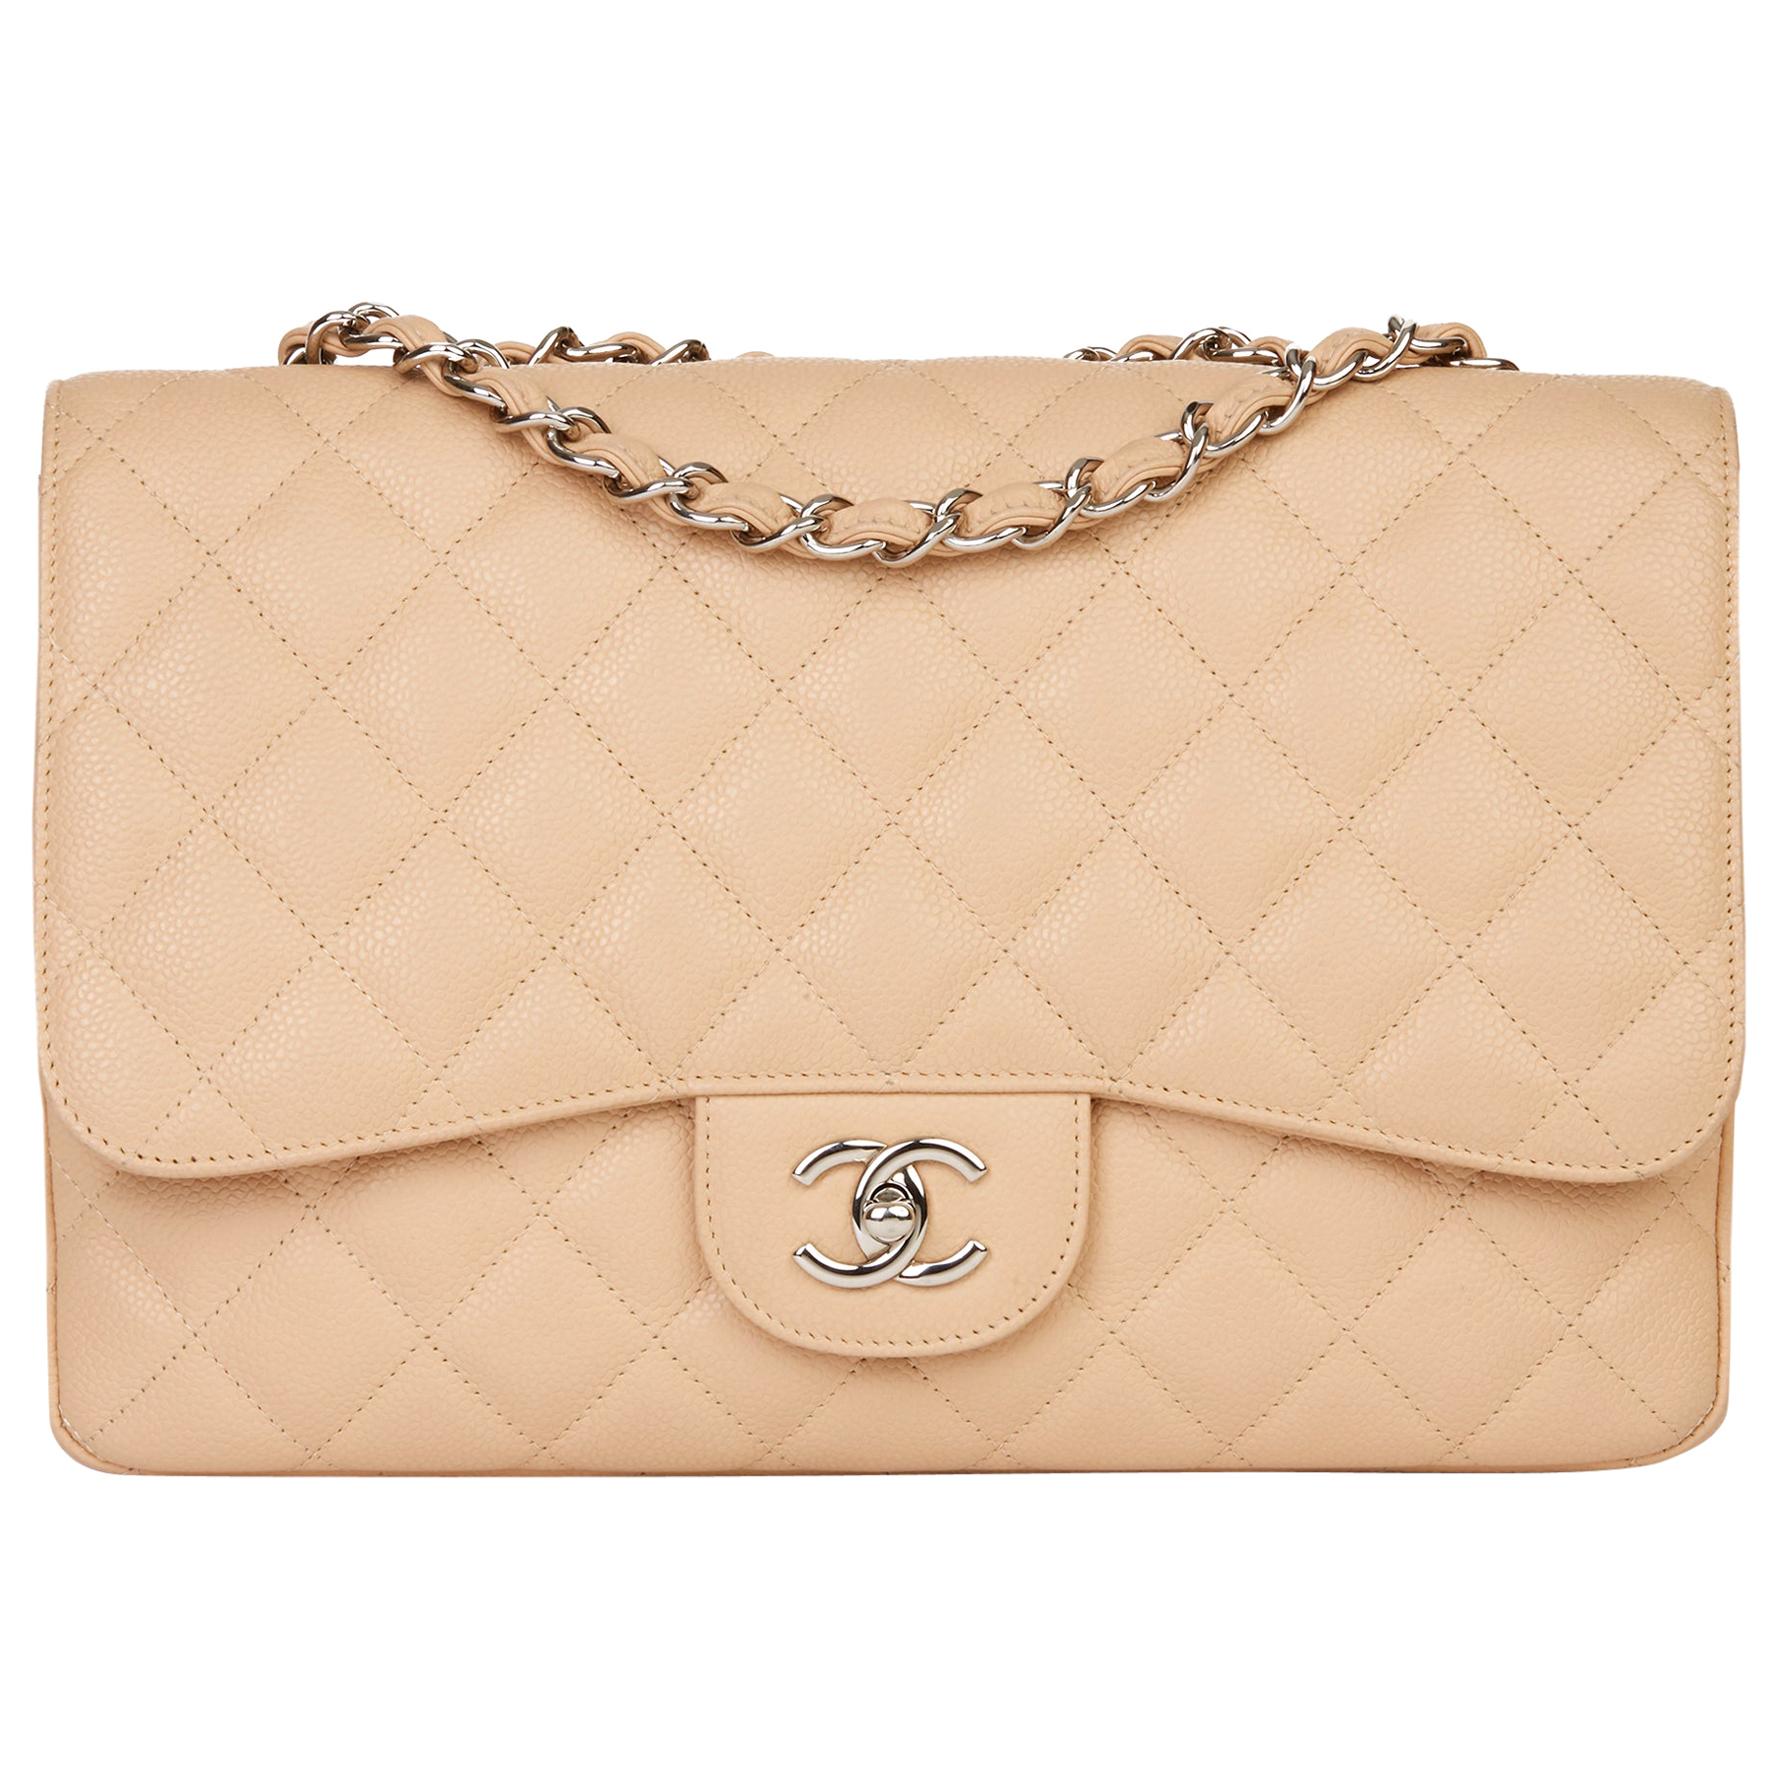 2010 Chanel Beige Quilted Caviar Leather Jumbo Classic Single Flap Bag